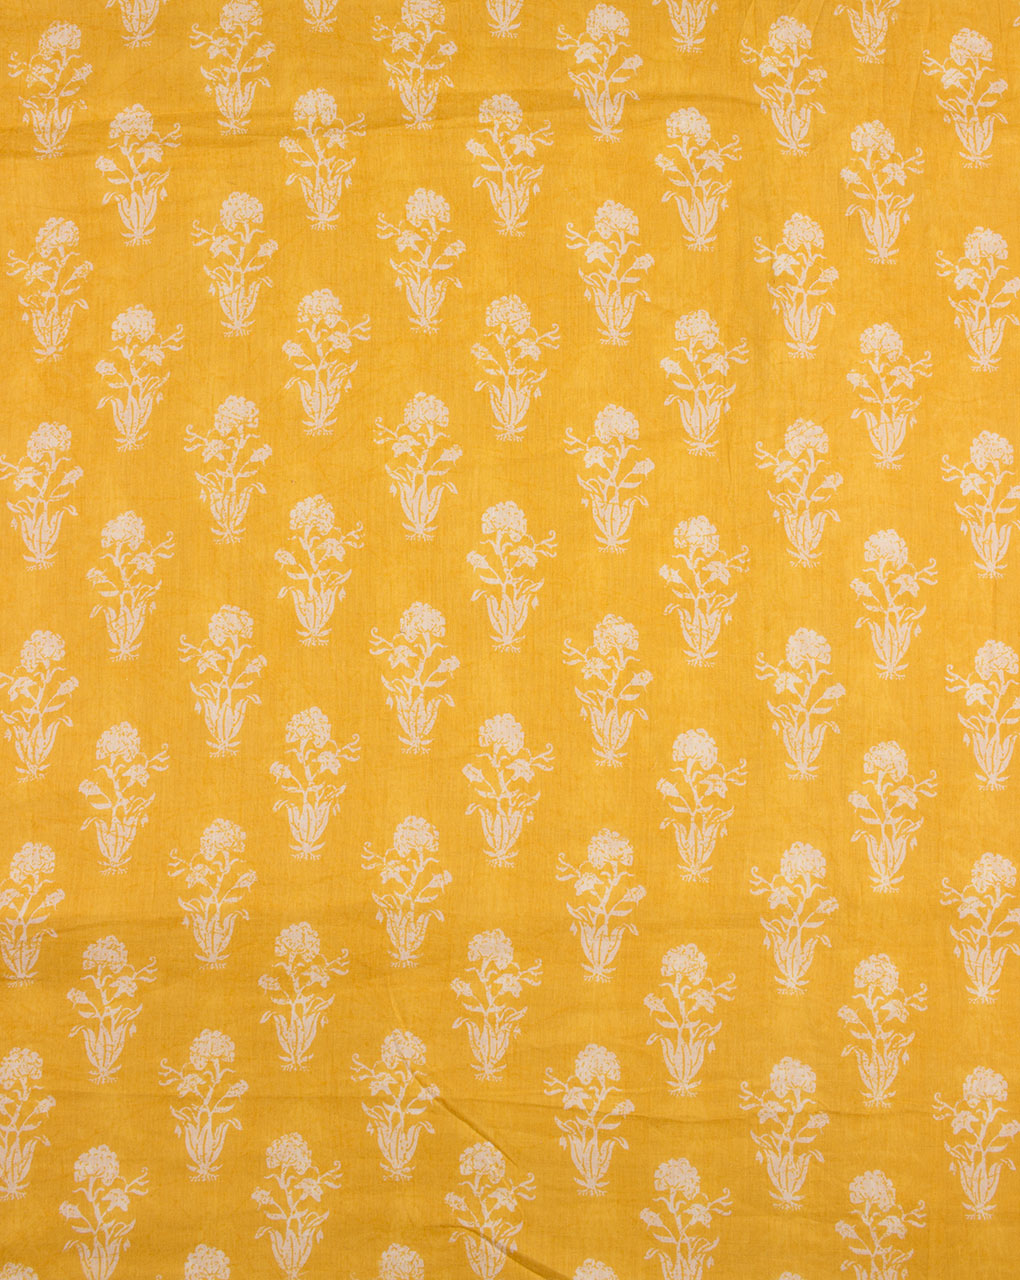 Discharge Print Voile Cotton Fabric - Fabriclore.com